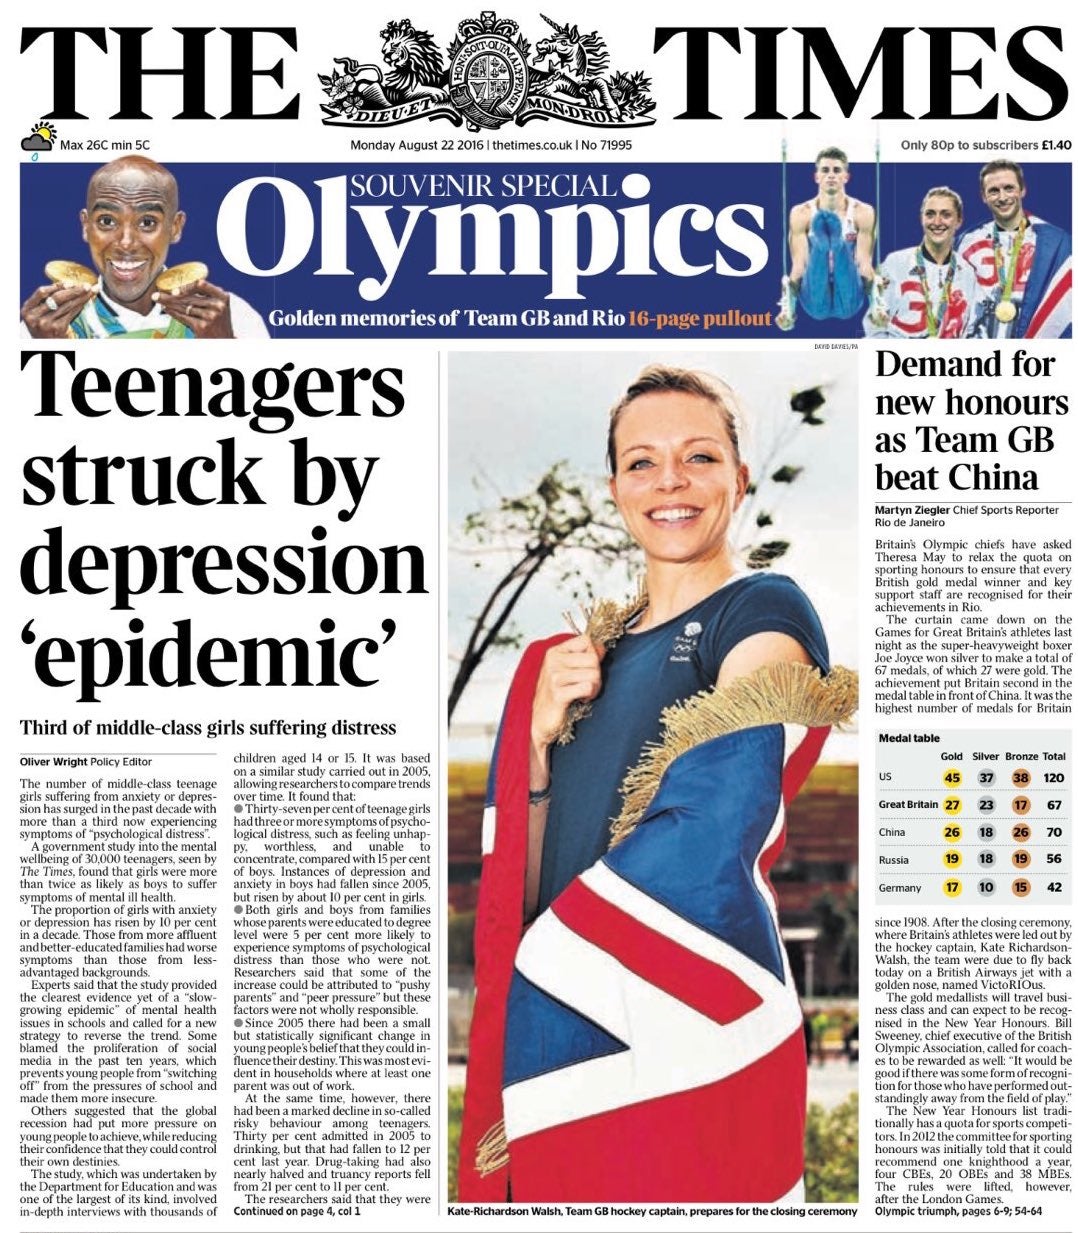 Olympics - The Times